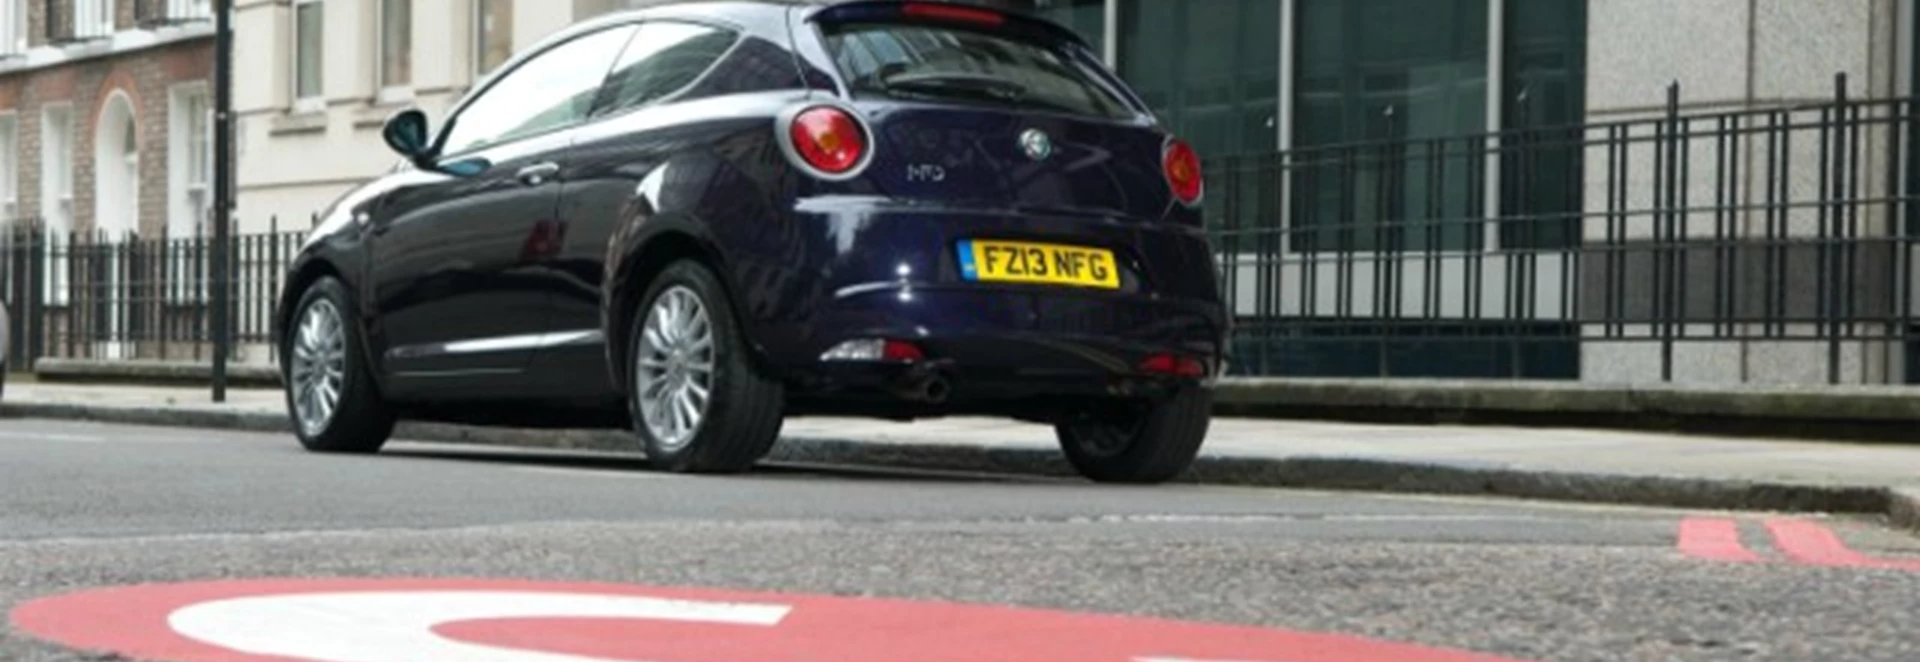 Top 10 congestion charge exempt cars 